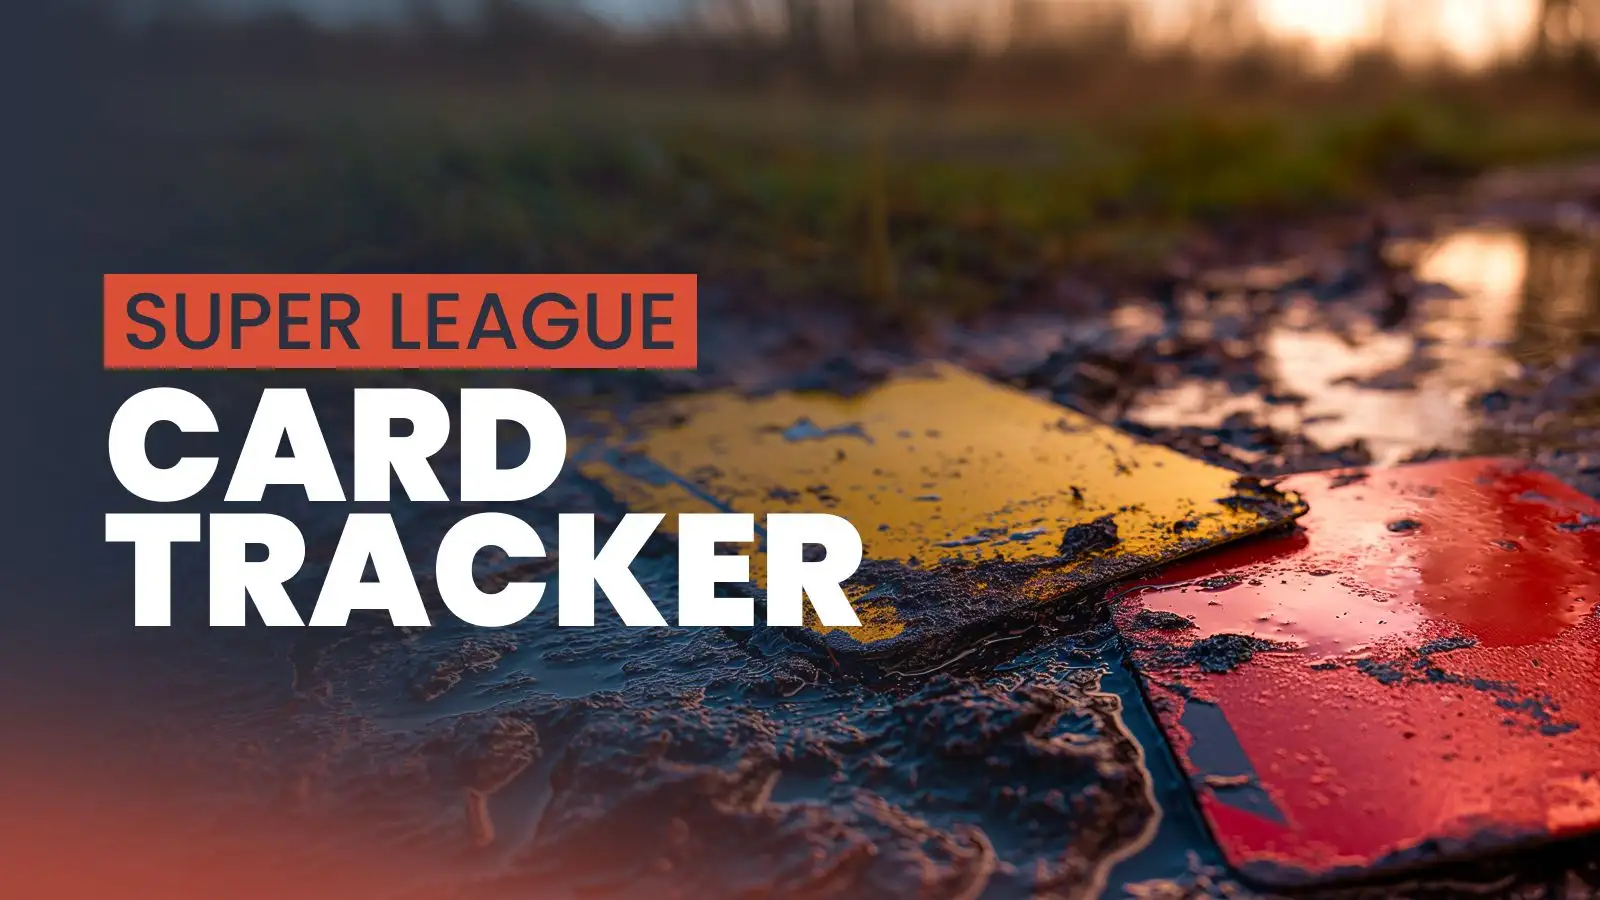 Cardtracker: Every yellow and red card in Super League this season